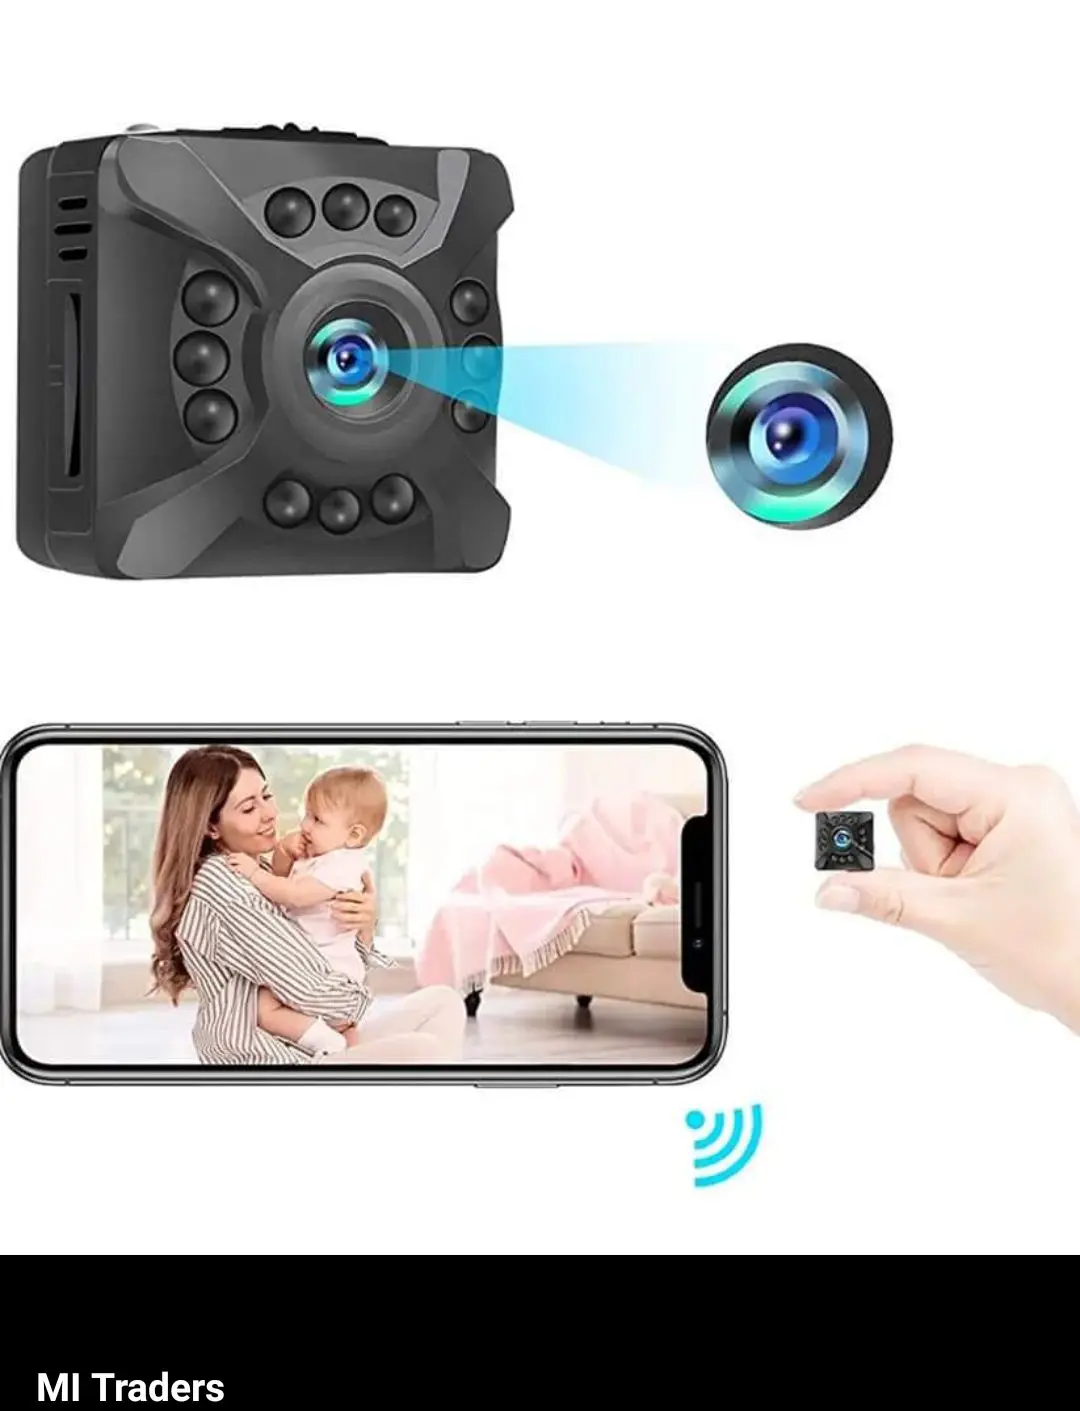 DEPSTECH Wireless Endoscope, IP67 Waterproof WiFi Borescope Inspection 2.0  Megapixels HD Snake Camera for Android and iOS Smartphone, iPhone, iPad